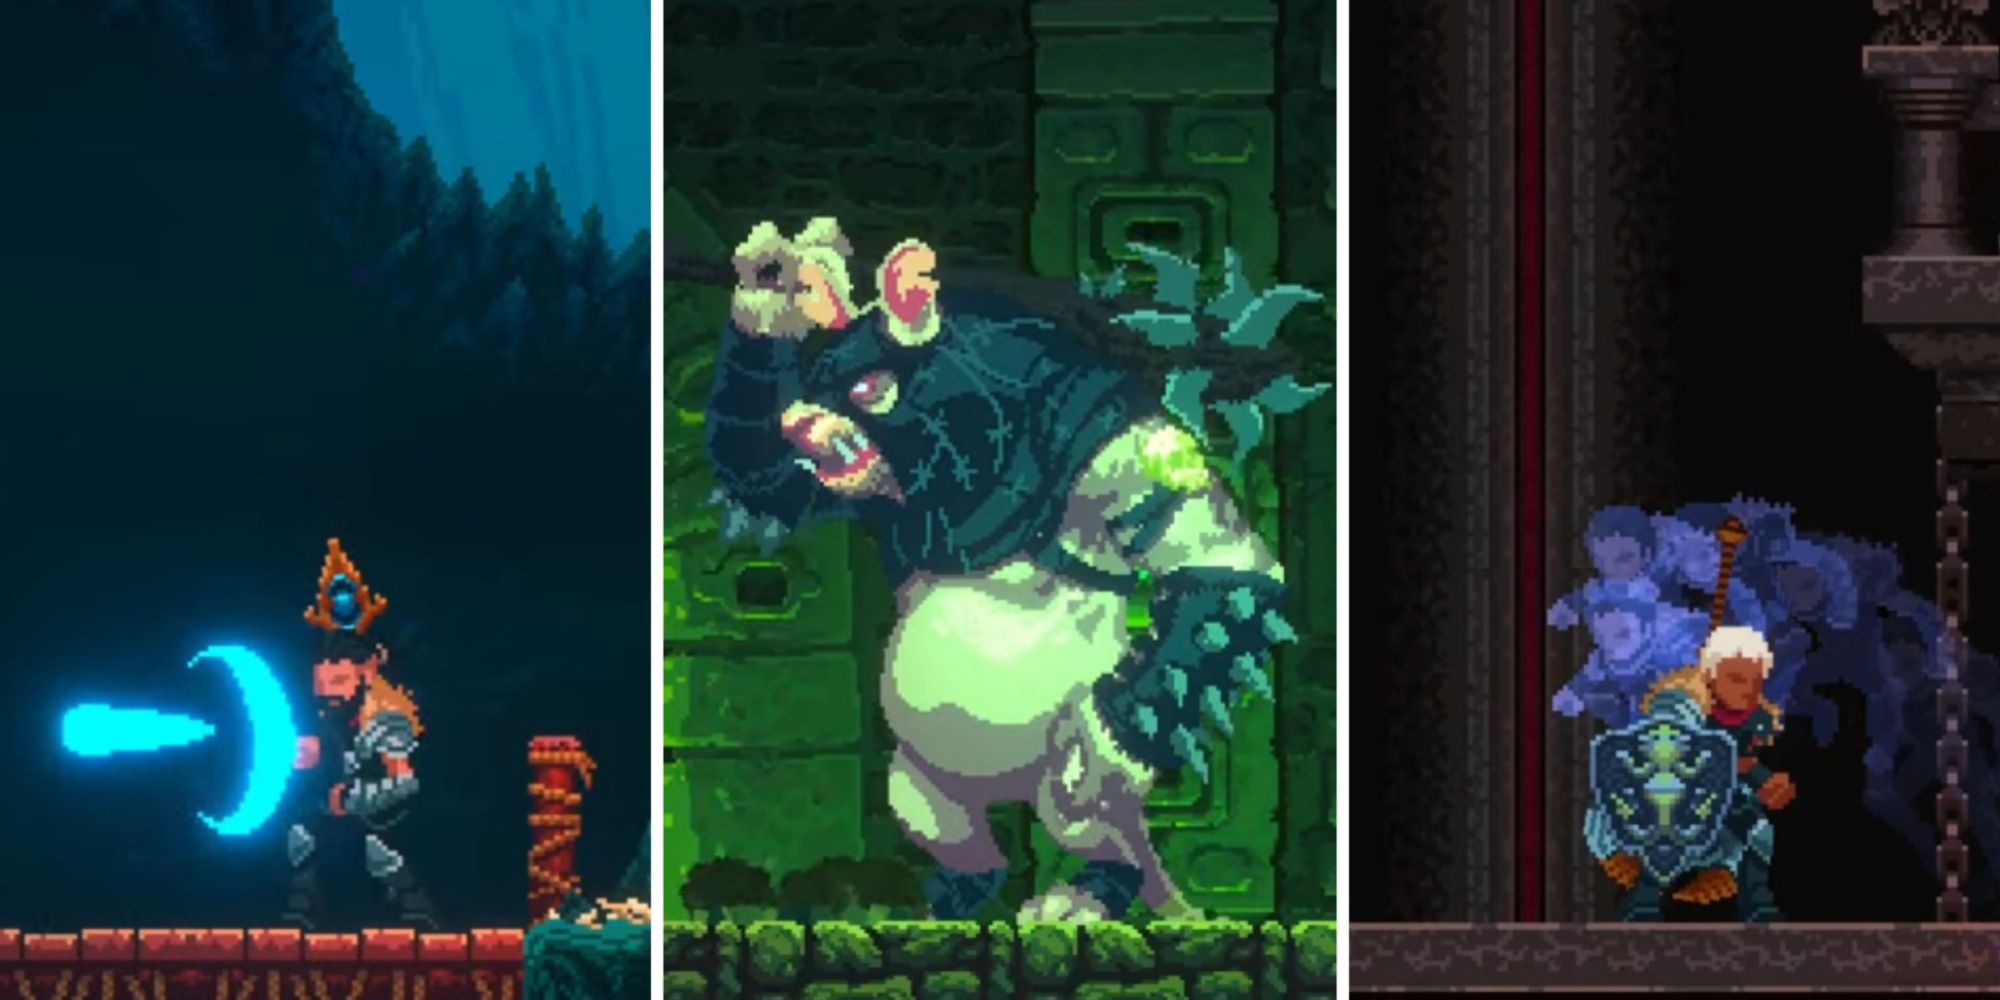 From left to right, firing a magic orb with a staff in Elderand, confronting a large rat monster in elderand, and using your dodge ability in Elderand